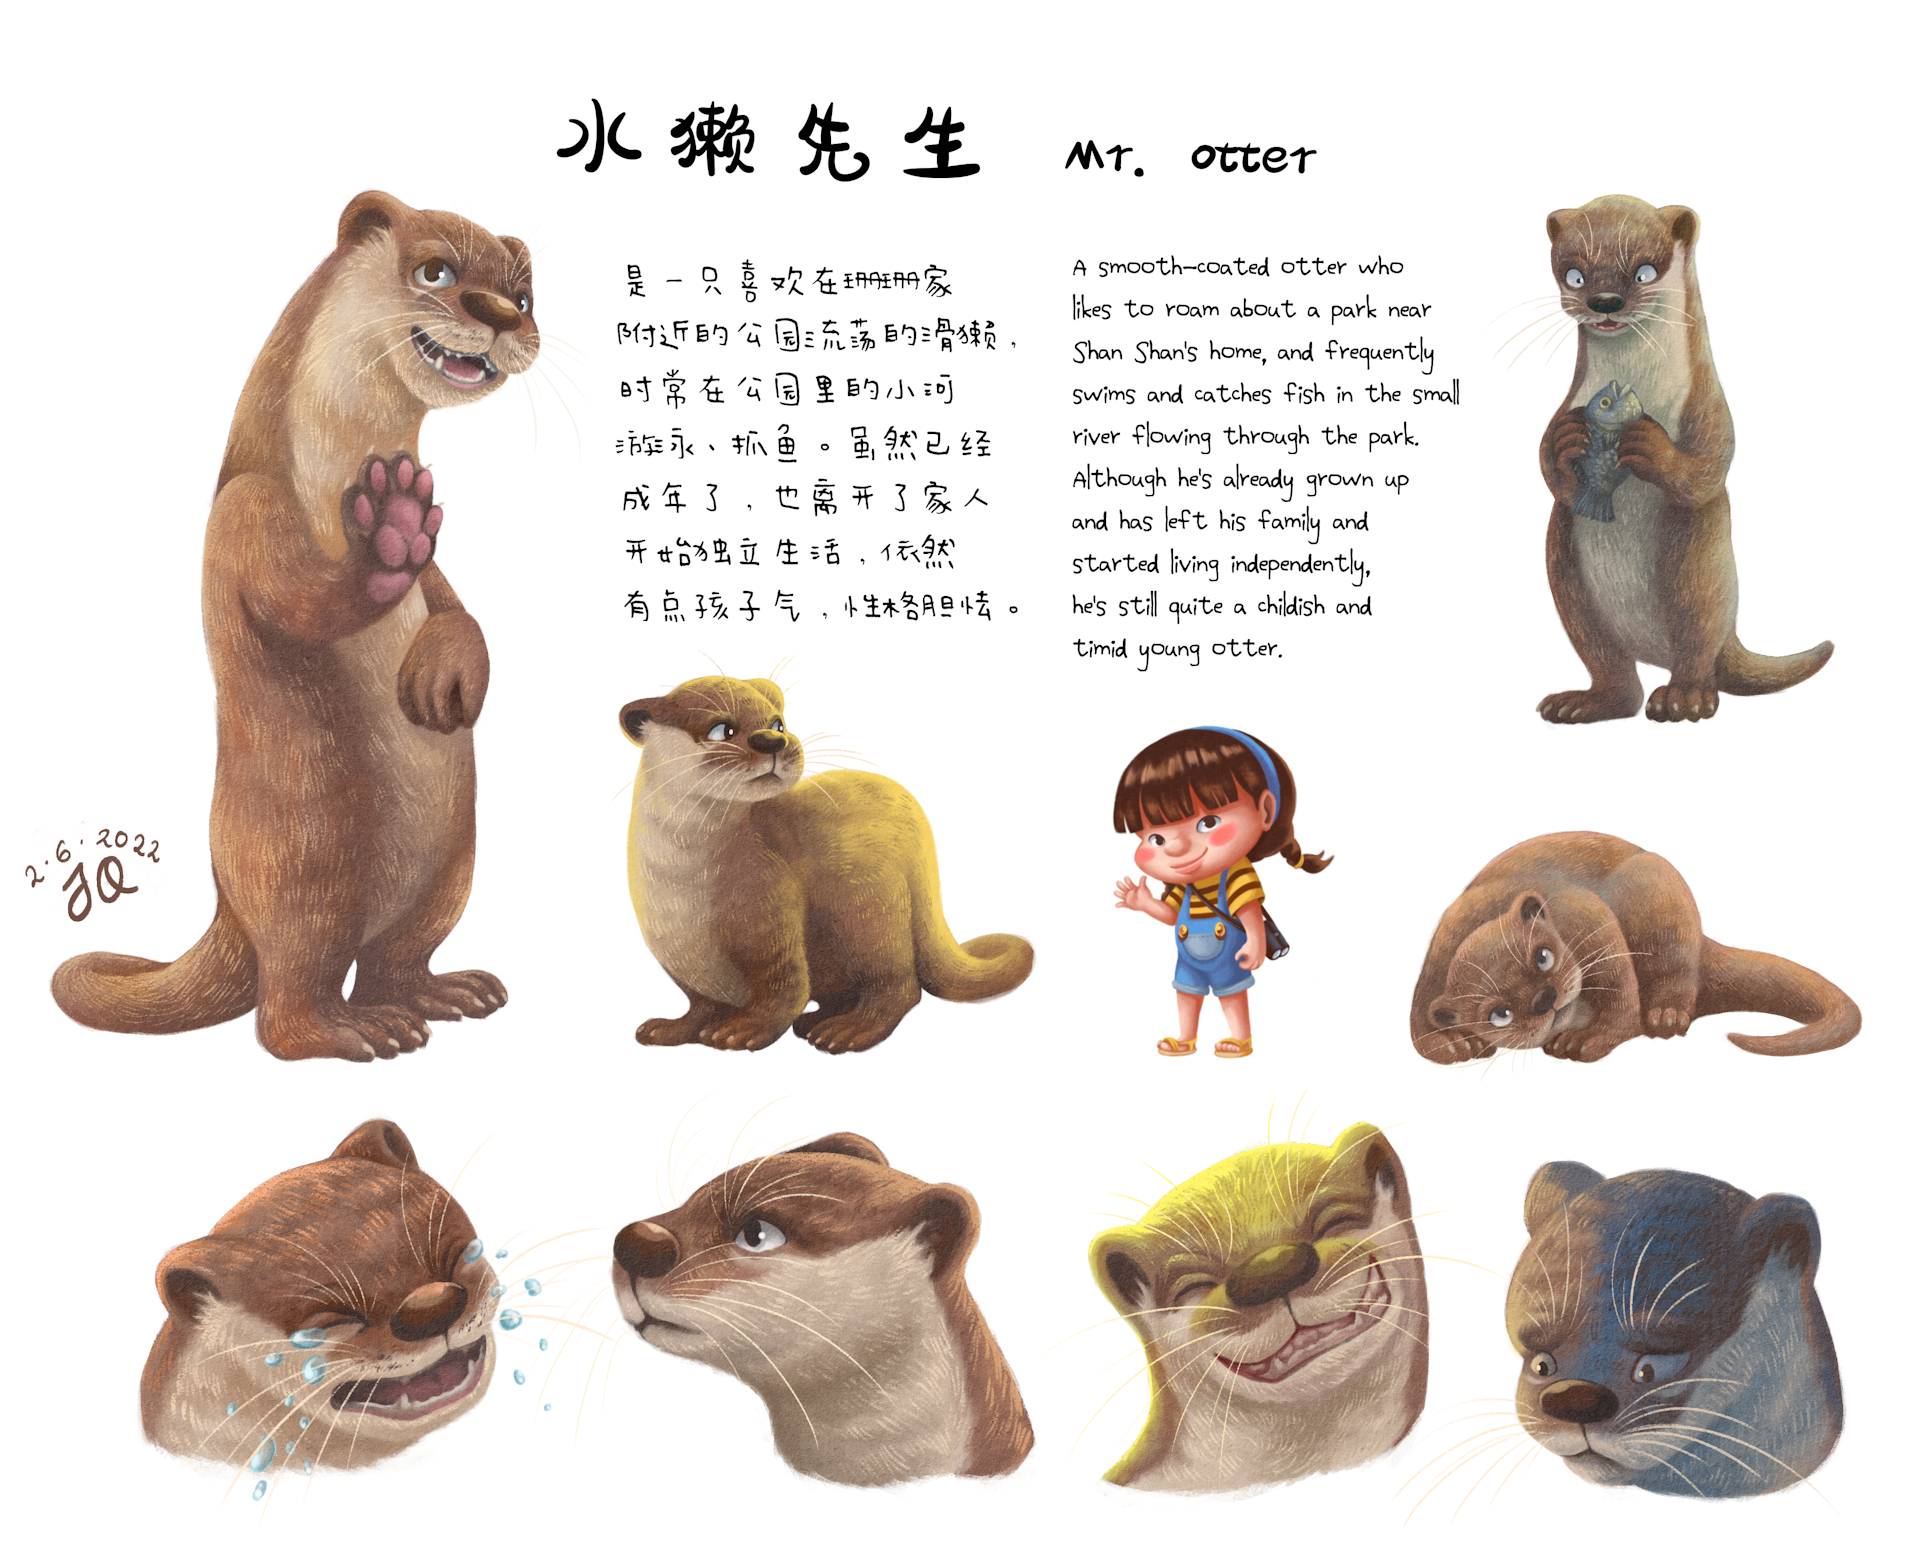 Character design model sheet for Mr. Otter, a smooth-coated otter who likes to roam about a park near Shan Shan's home. The sheet shows Mr. Otter in several different poses and expressions, also juxtaposed next to Shan Shan for size reference.